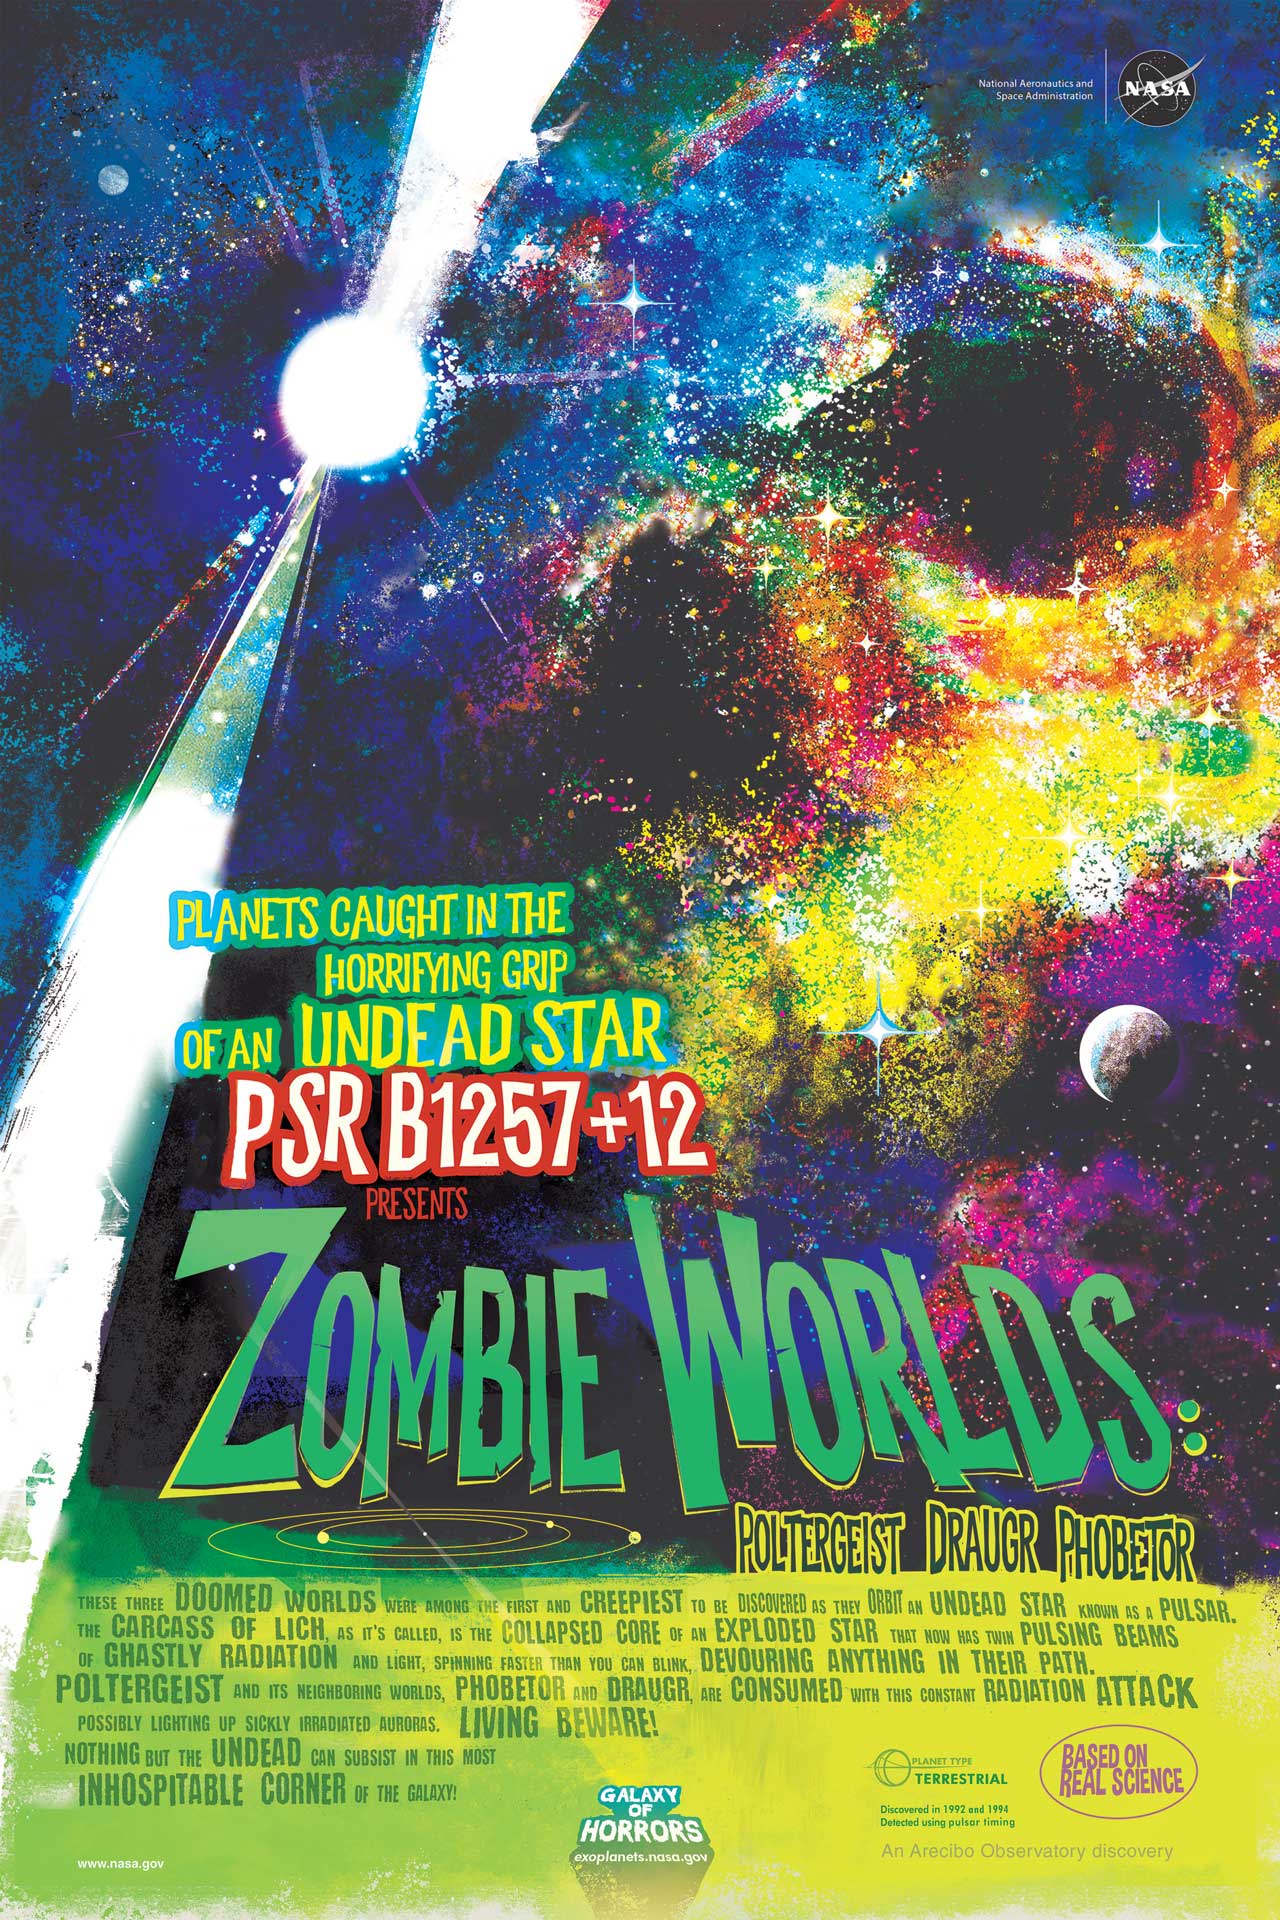 Zombie Worlds Poster showing pulsar planets in a vintage movie poster style saying: Planets caught in the horrifying grasp of an undead star.